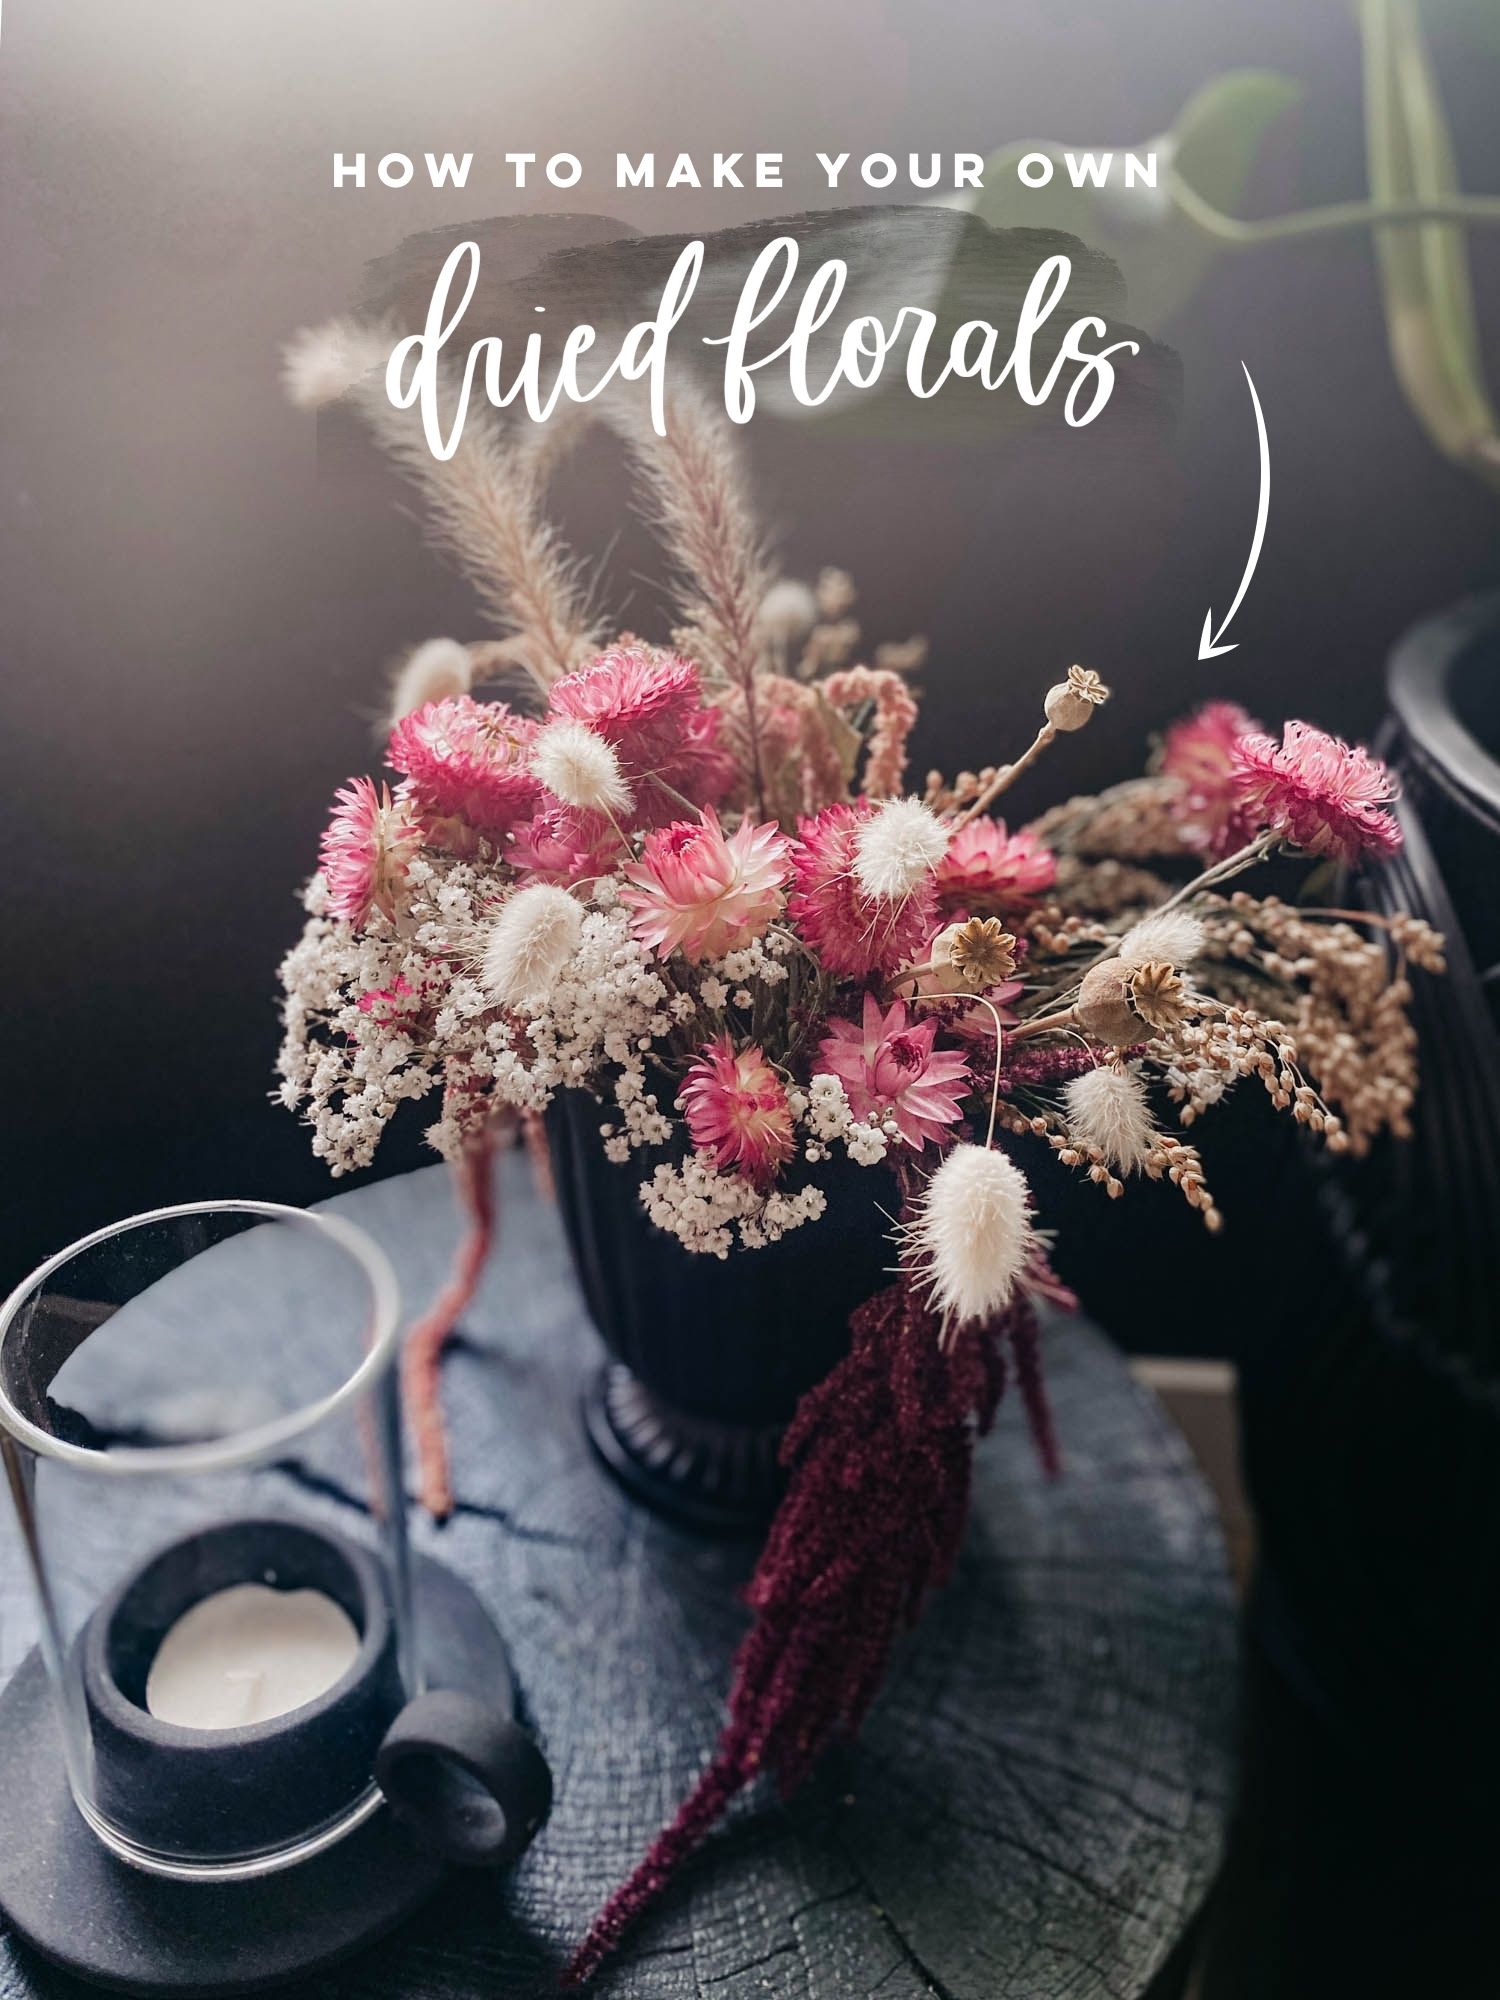 How to dry florals for decor